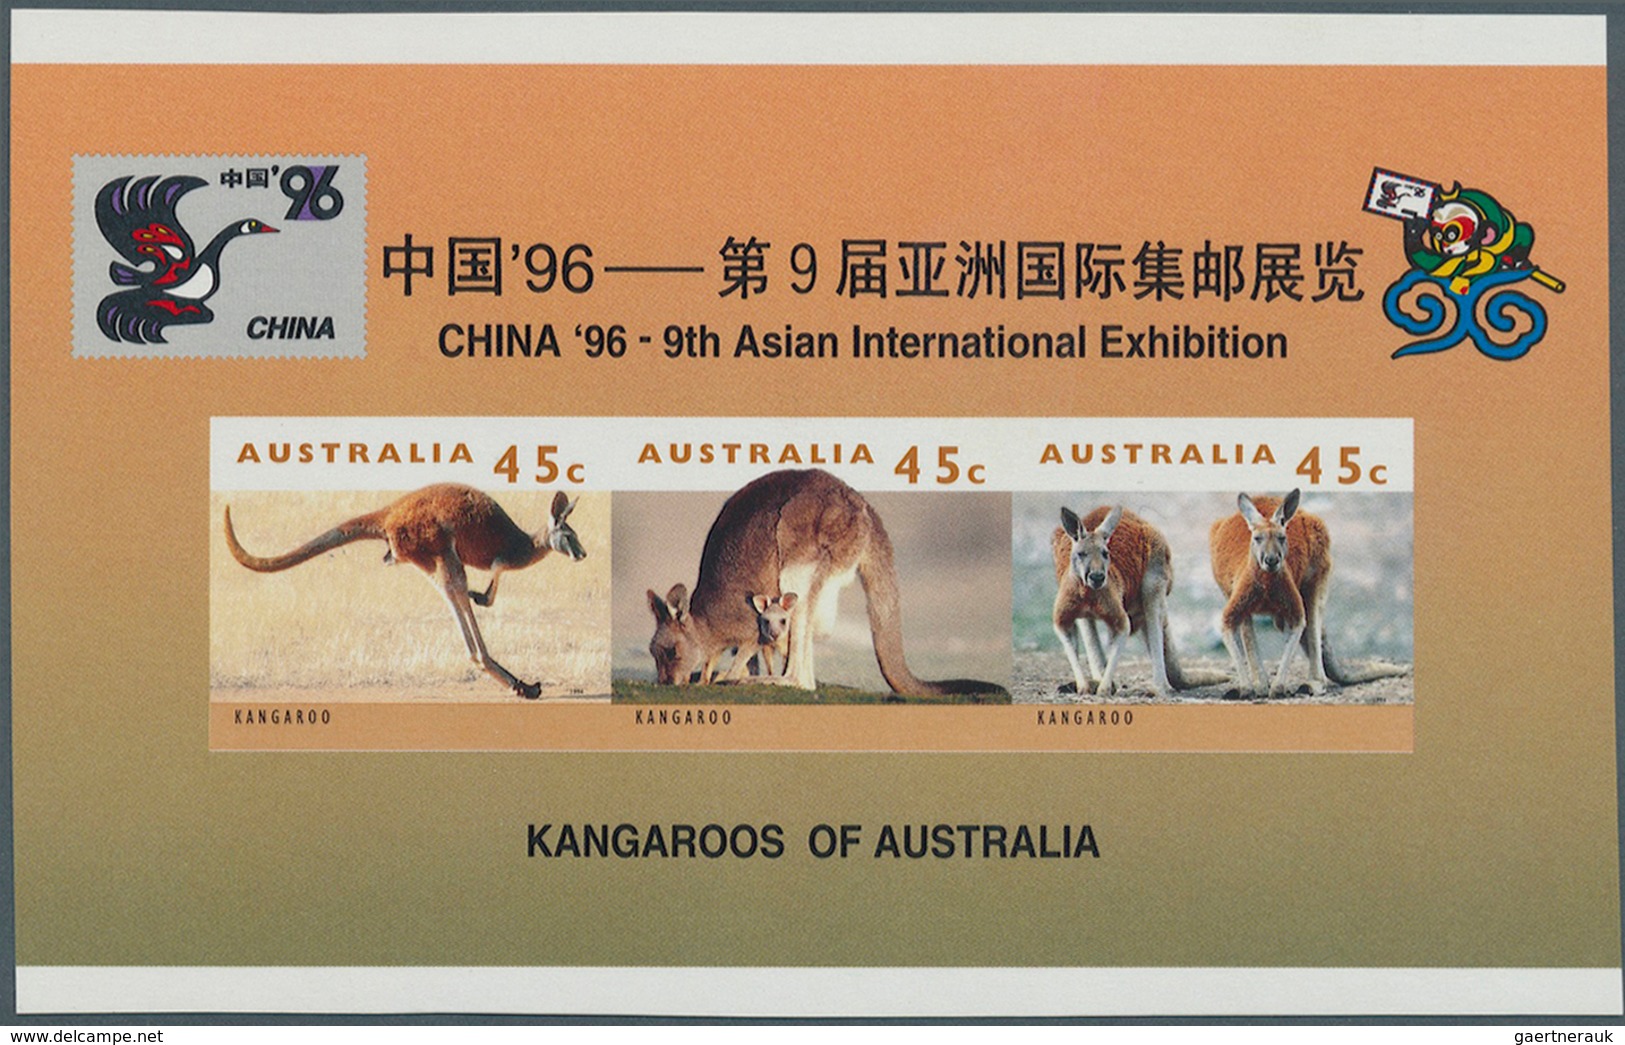 Australien: 1995/96, Big lot IMPERFORATED stamps for investors or specialist containing 4 different